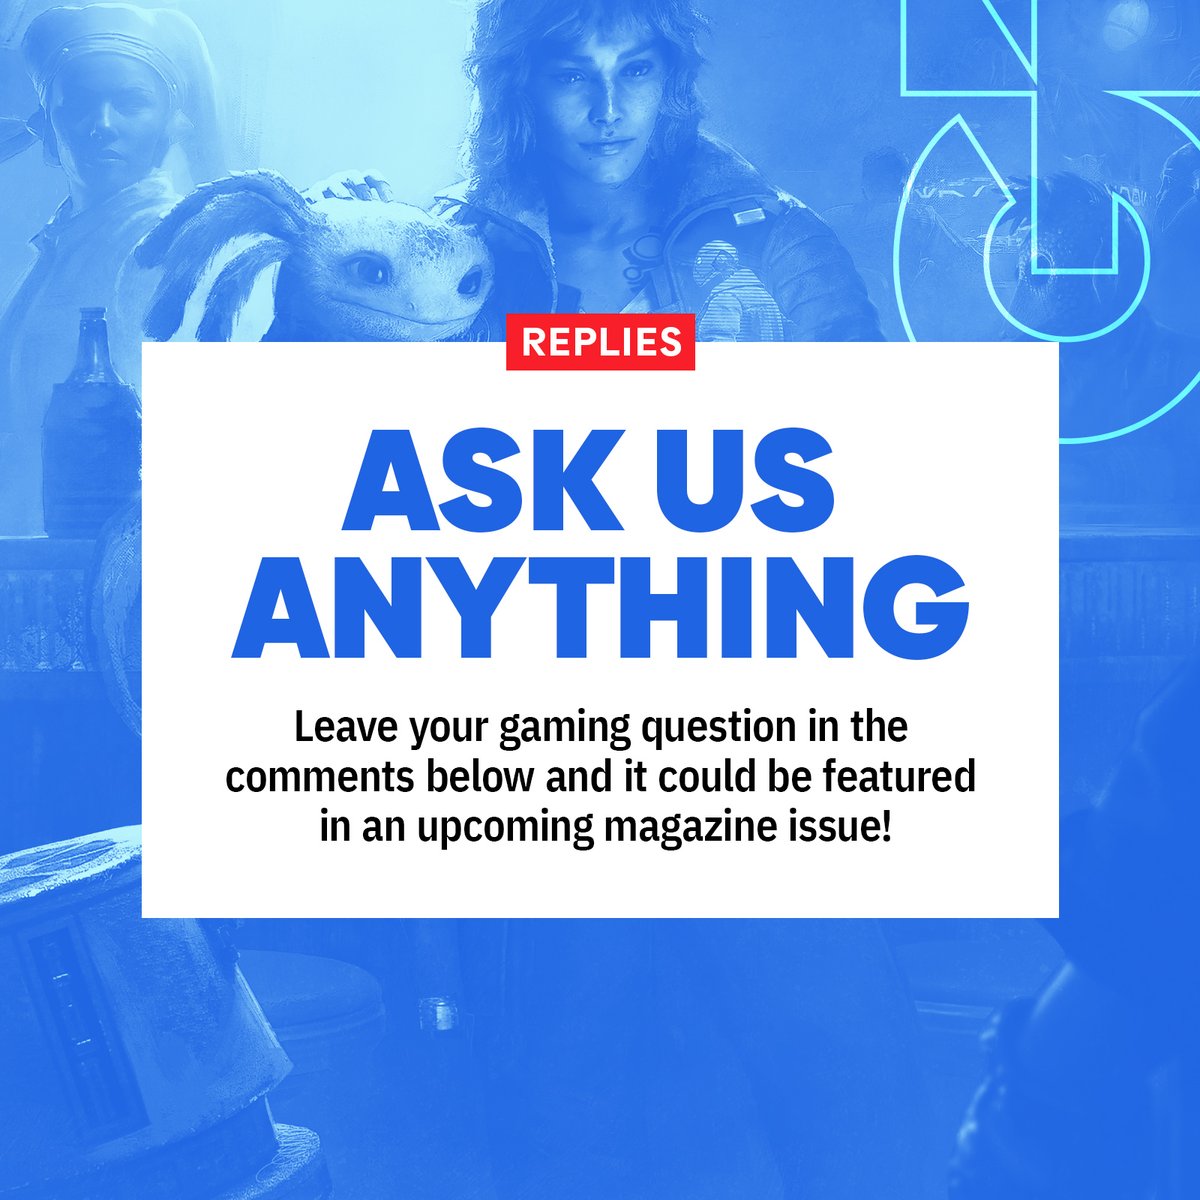 In each issue, Game Informer prints questions that are submitted by readers. Comment below with a question you'd like us to answer and see if it gets featured in a future issue!